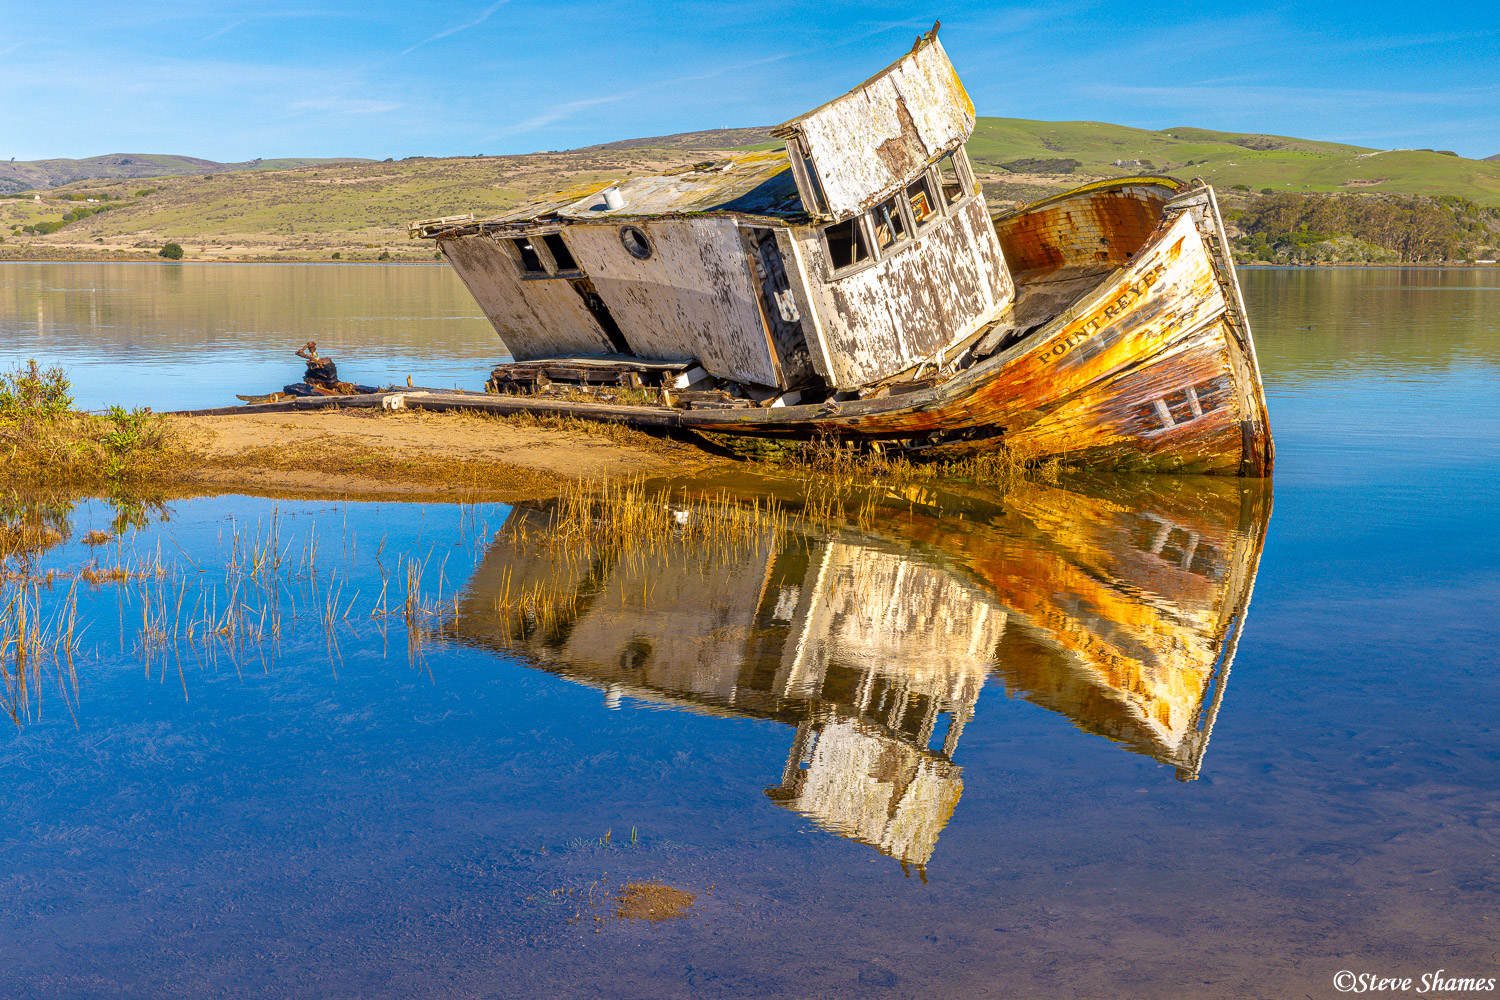 I noticed the great refection of this old shipwreck near Point Reyes.